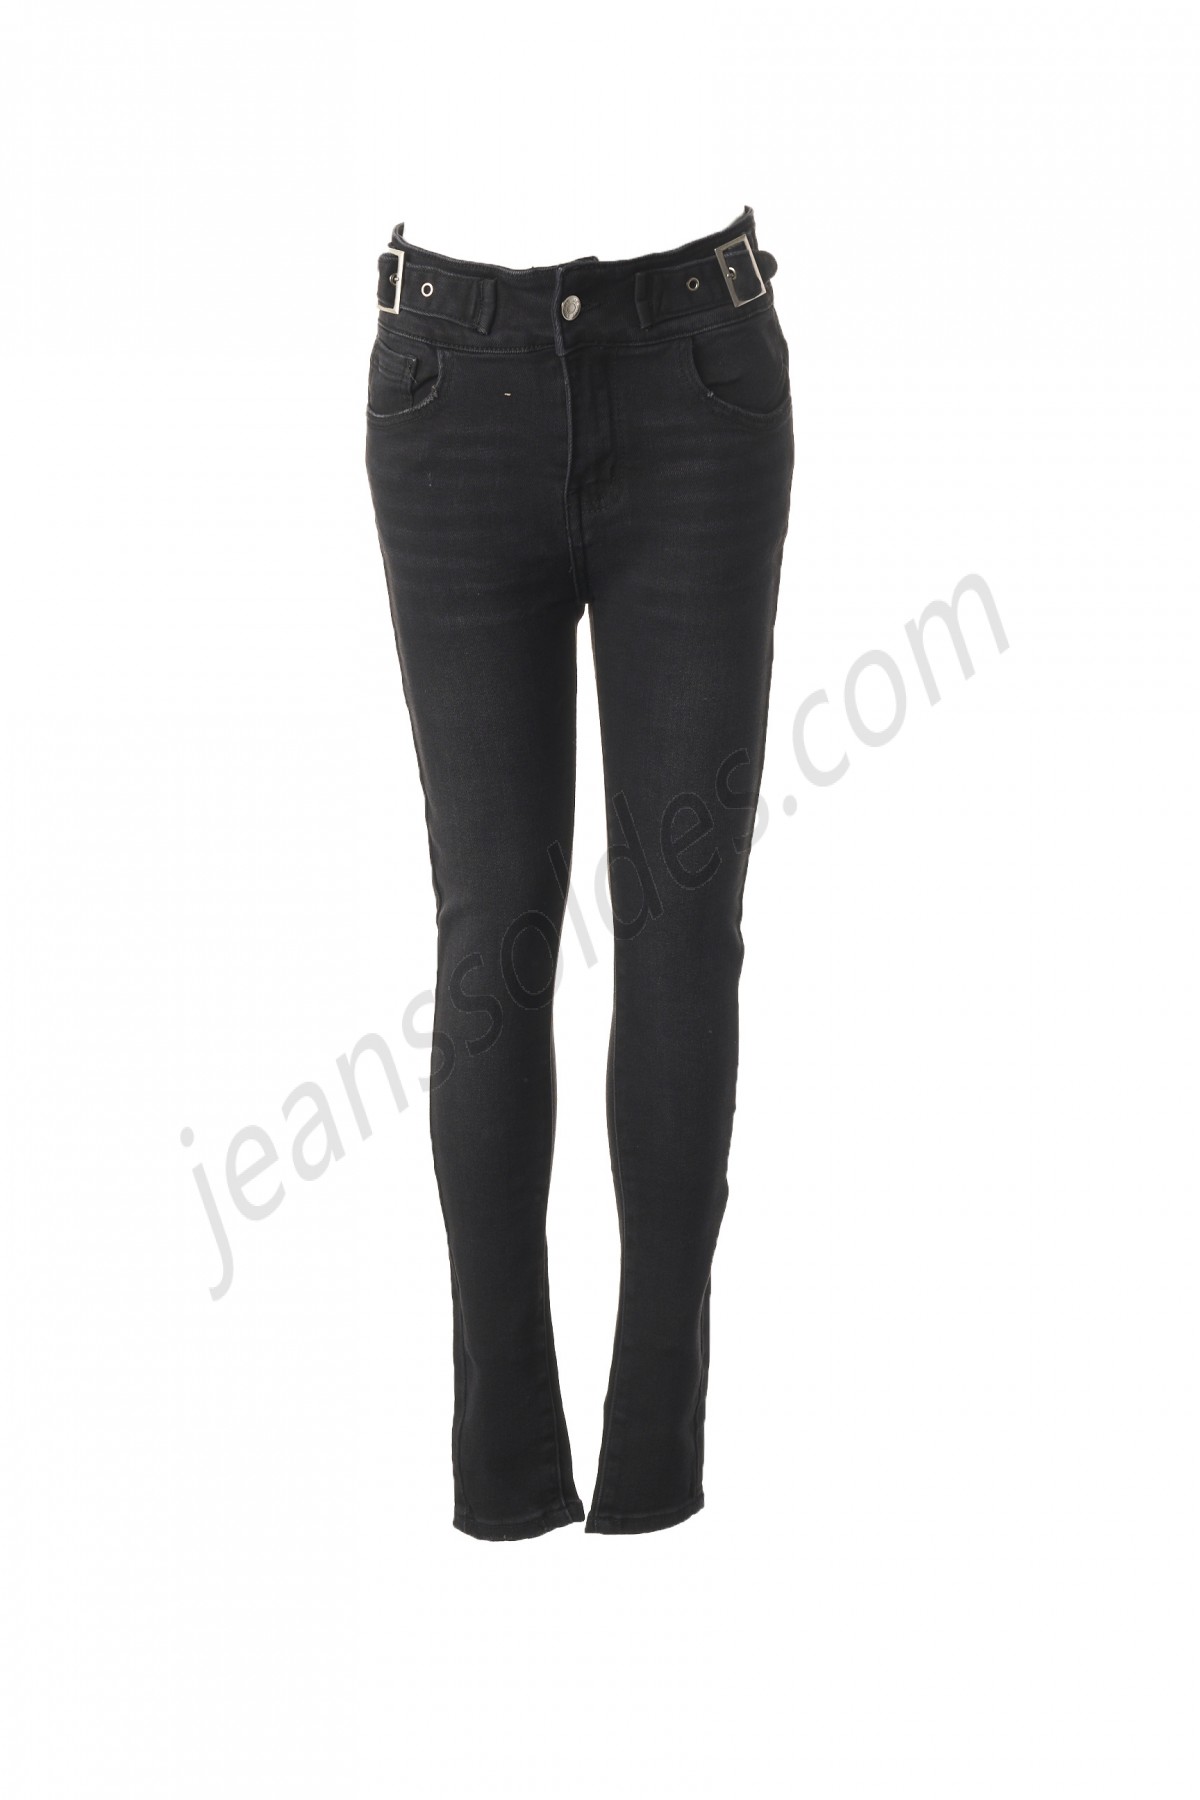 collection irl-Jeans coupe slim prix d’amis - -0